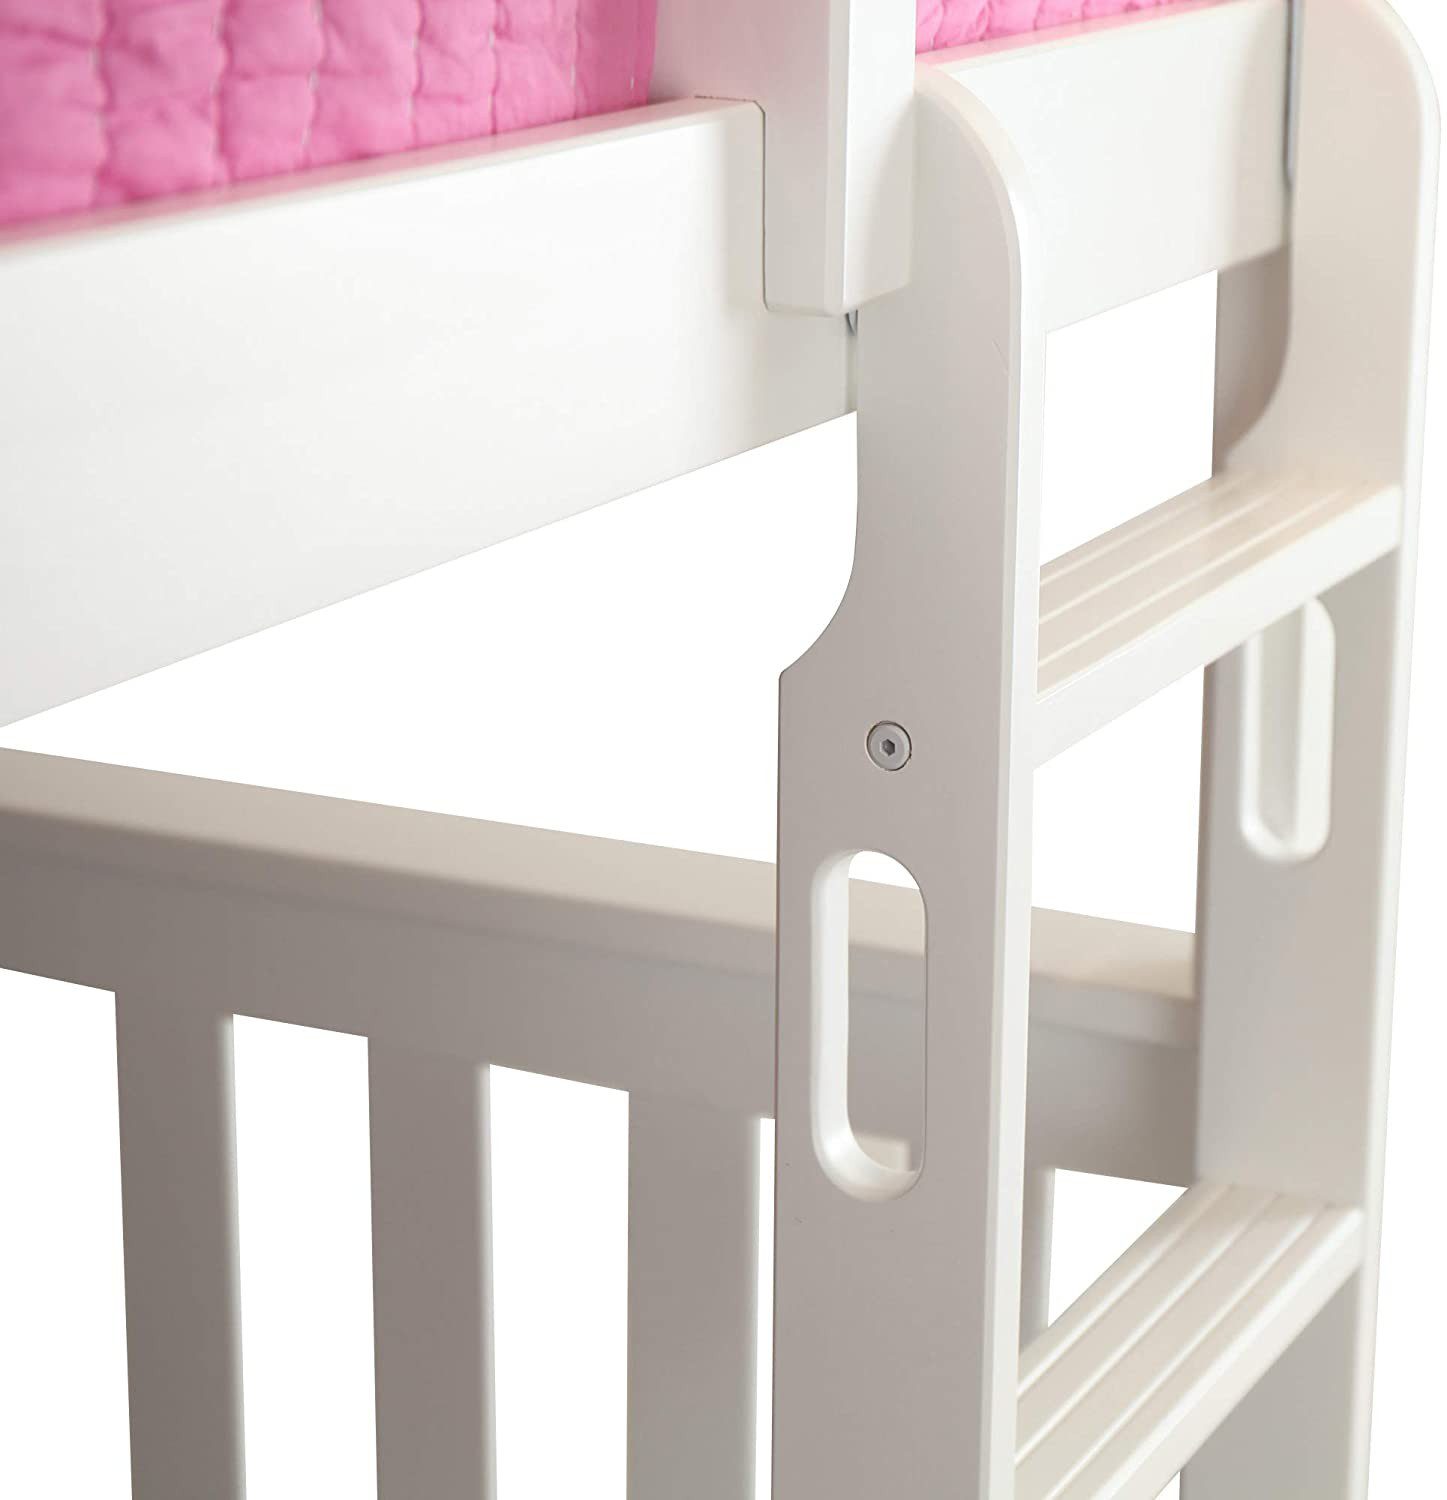 SOLID WOOD FULL OVER FULL BUNK BED IN WHITE WITH TRUNDLE BED